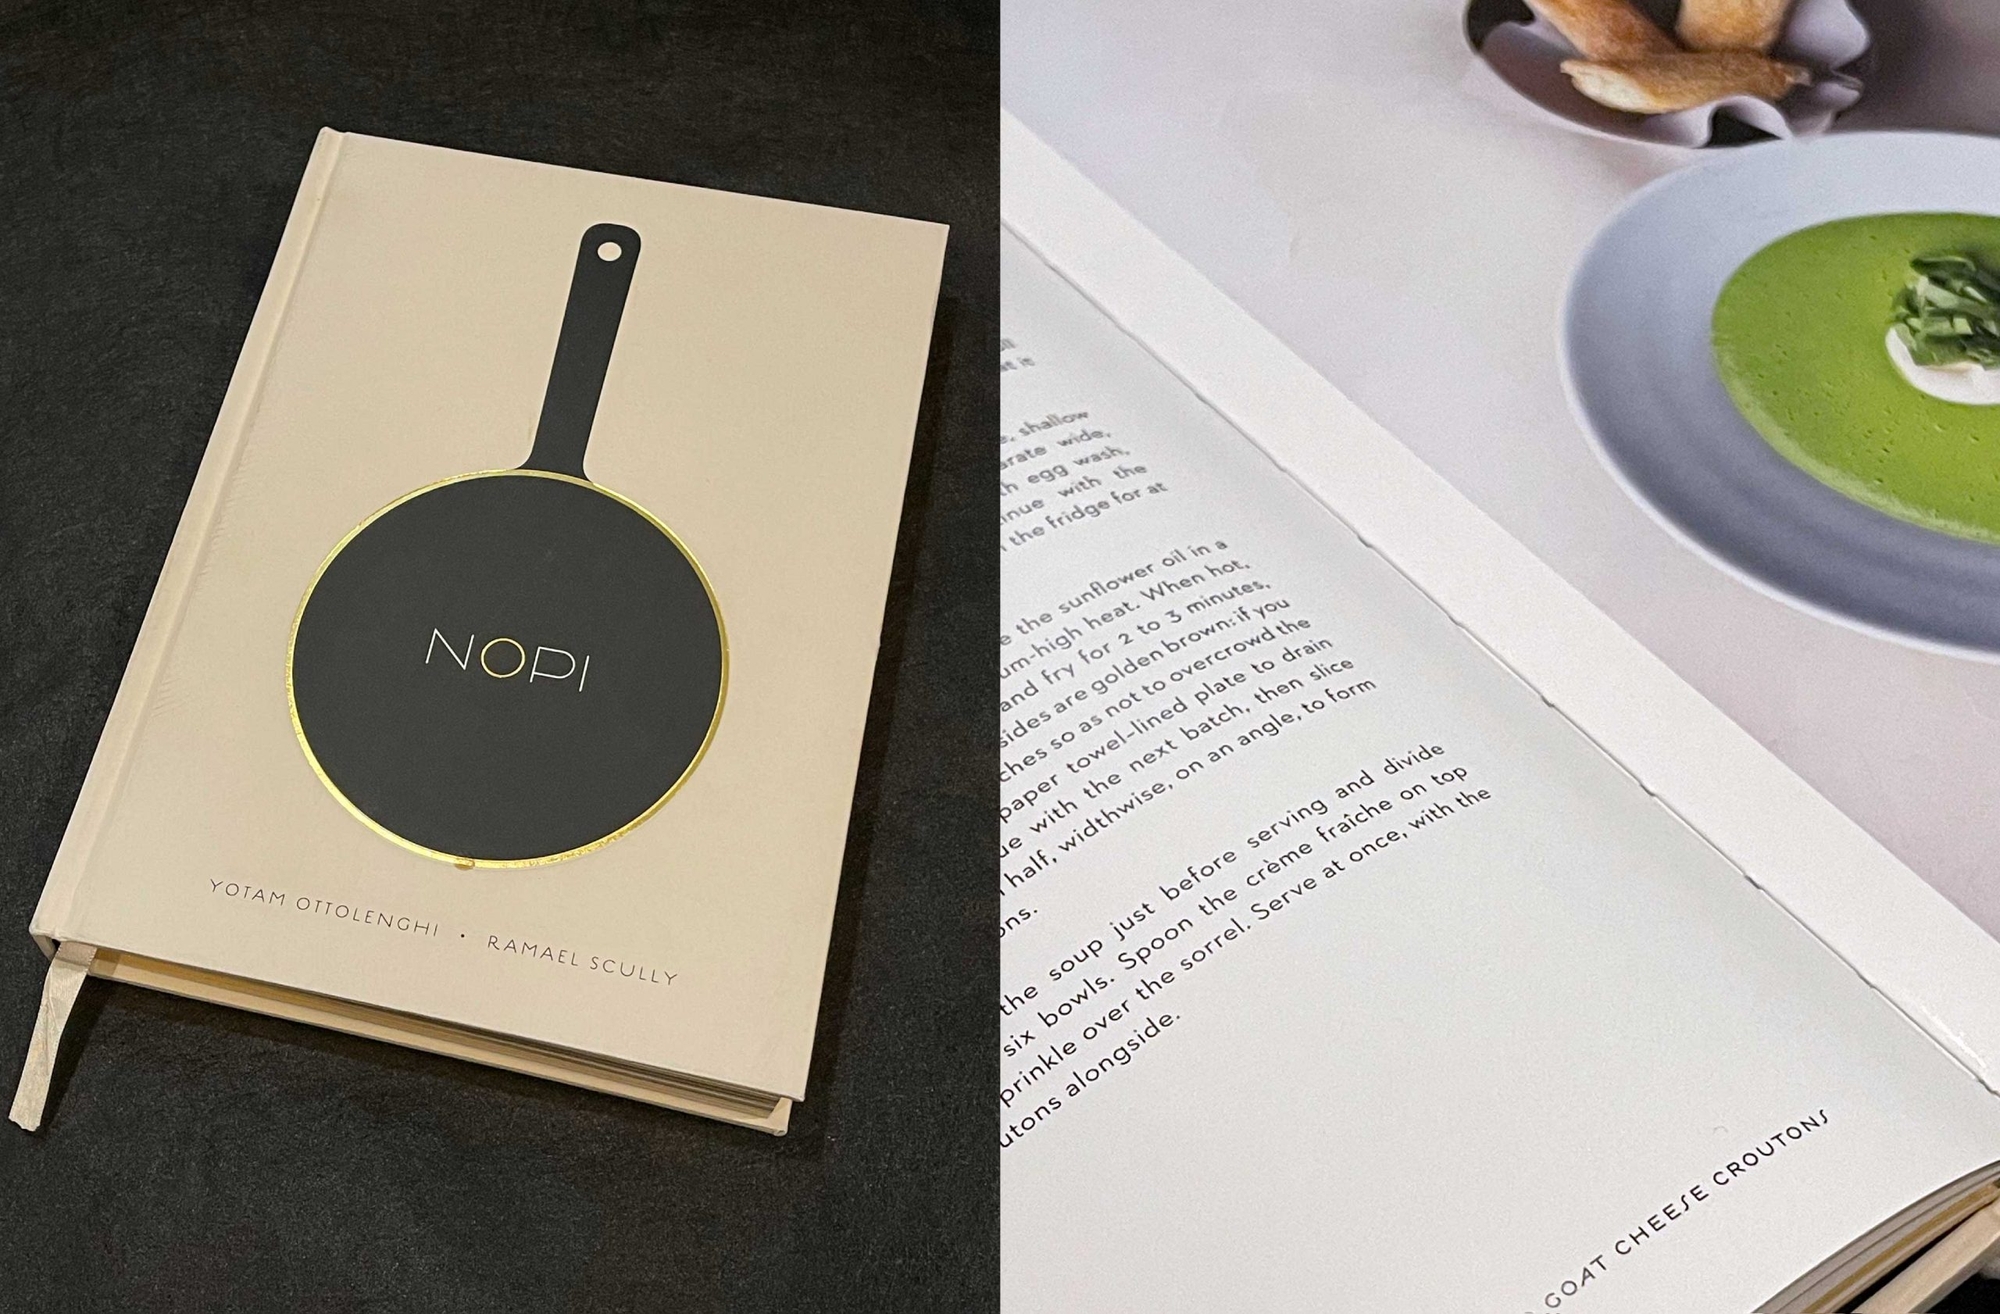 NOPI cookbook cover and inset photograph